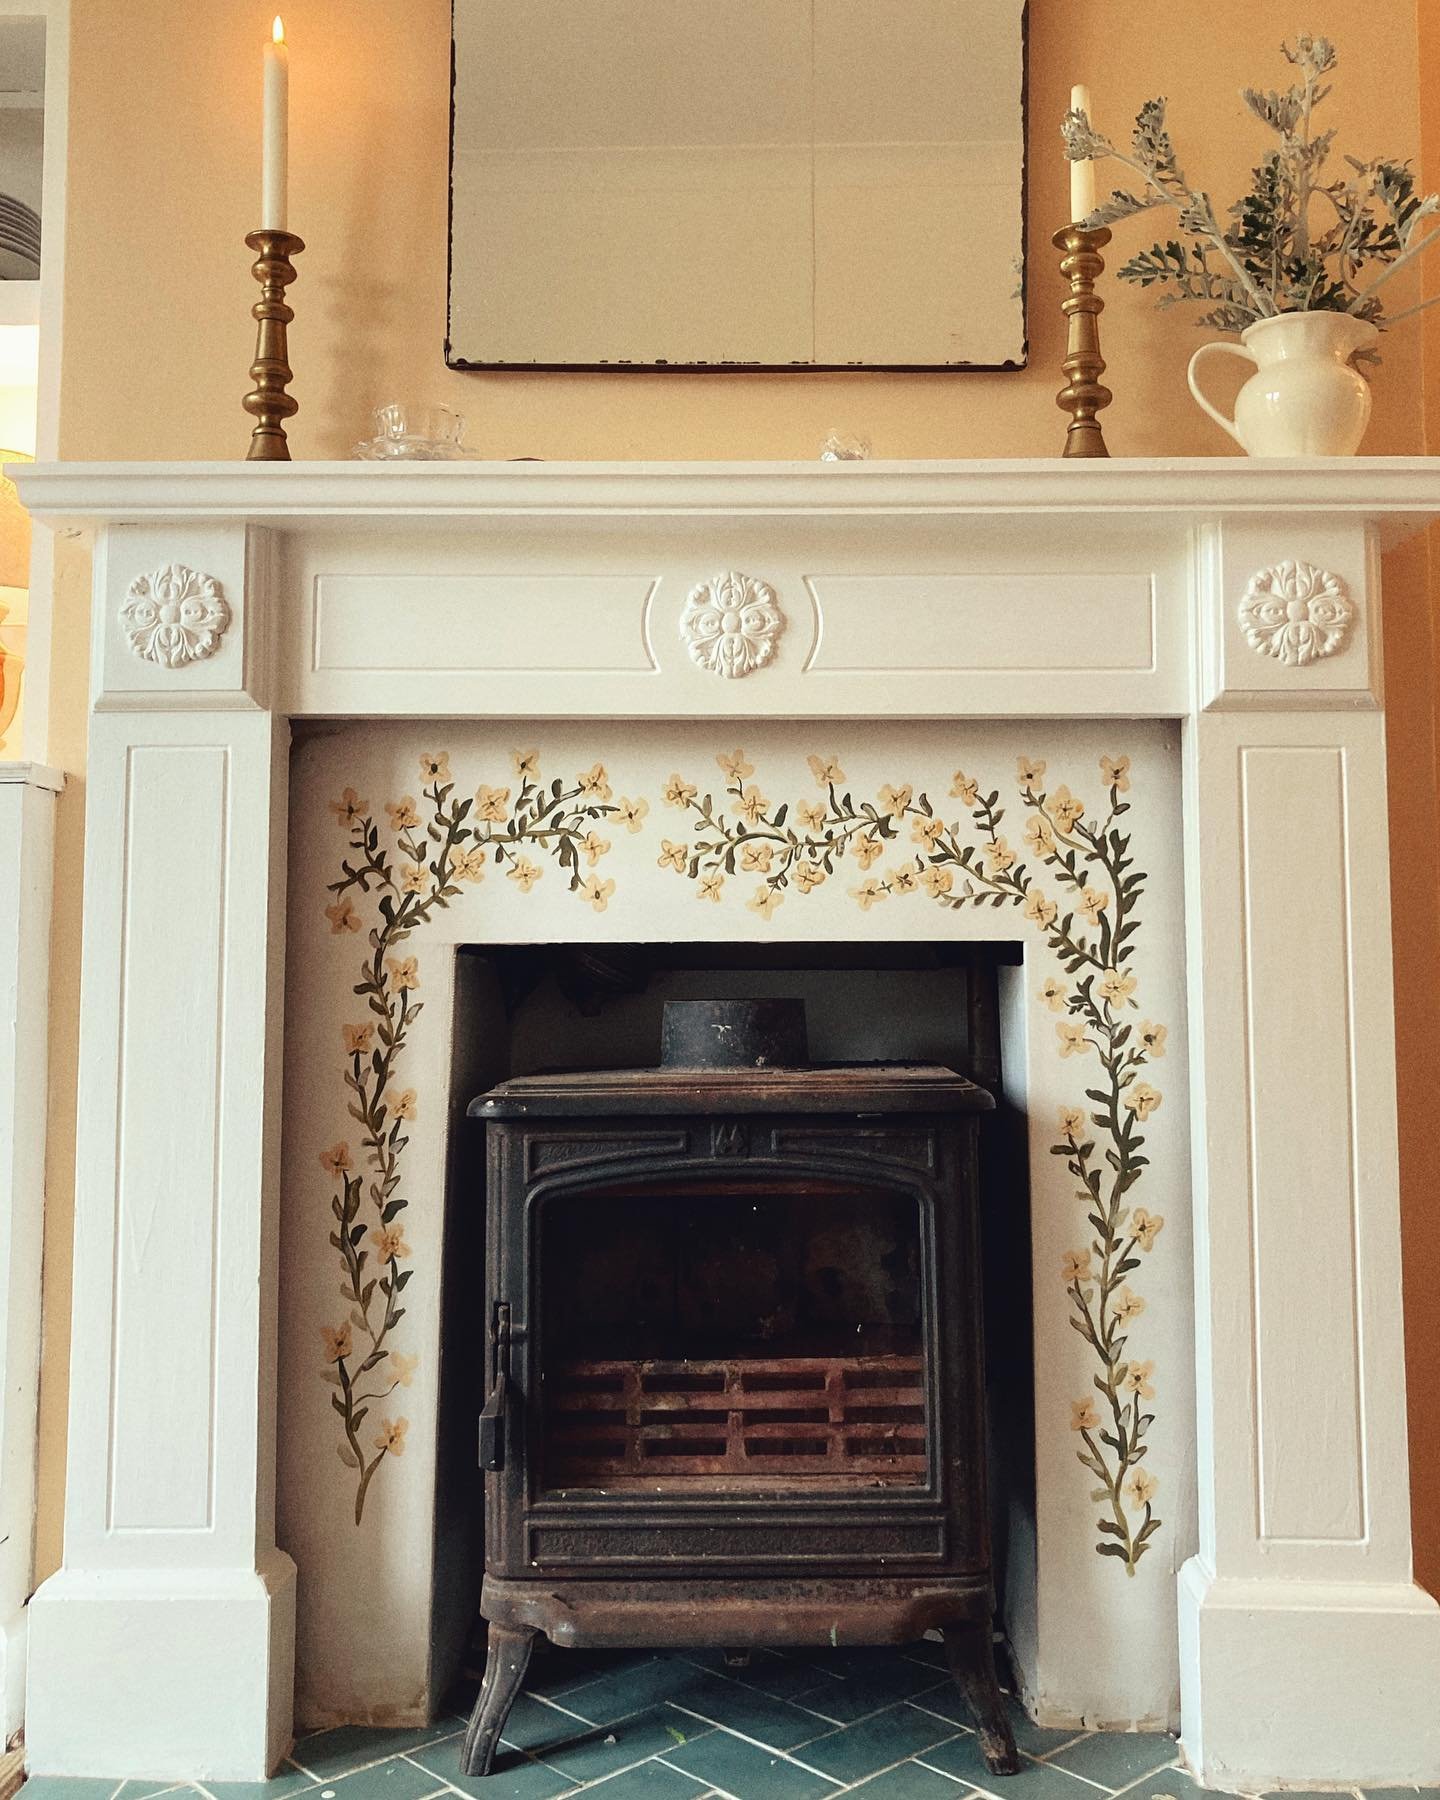 There&rsquo;s nothing that gives me more pleasure than painting the fire place. I&rsquo;m not sure why.
This months is a made up flower.  I used the same yellow I did for the walls. 

.
.
.
.
.
.
.
.
.
.
.
.
#fireplace #painting #wallart #interiordes